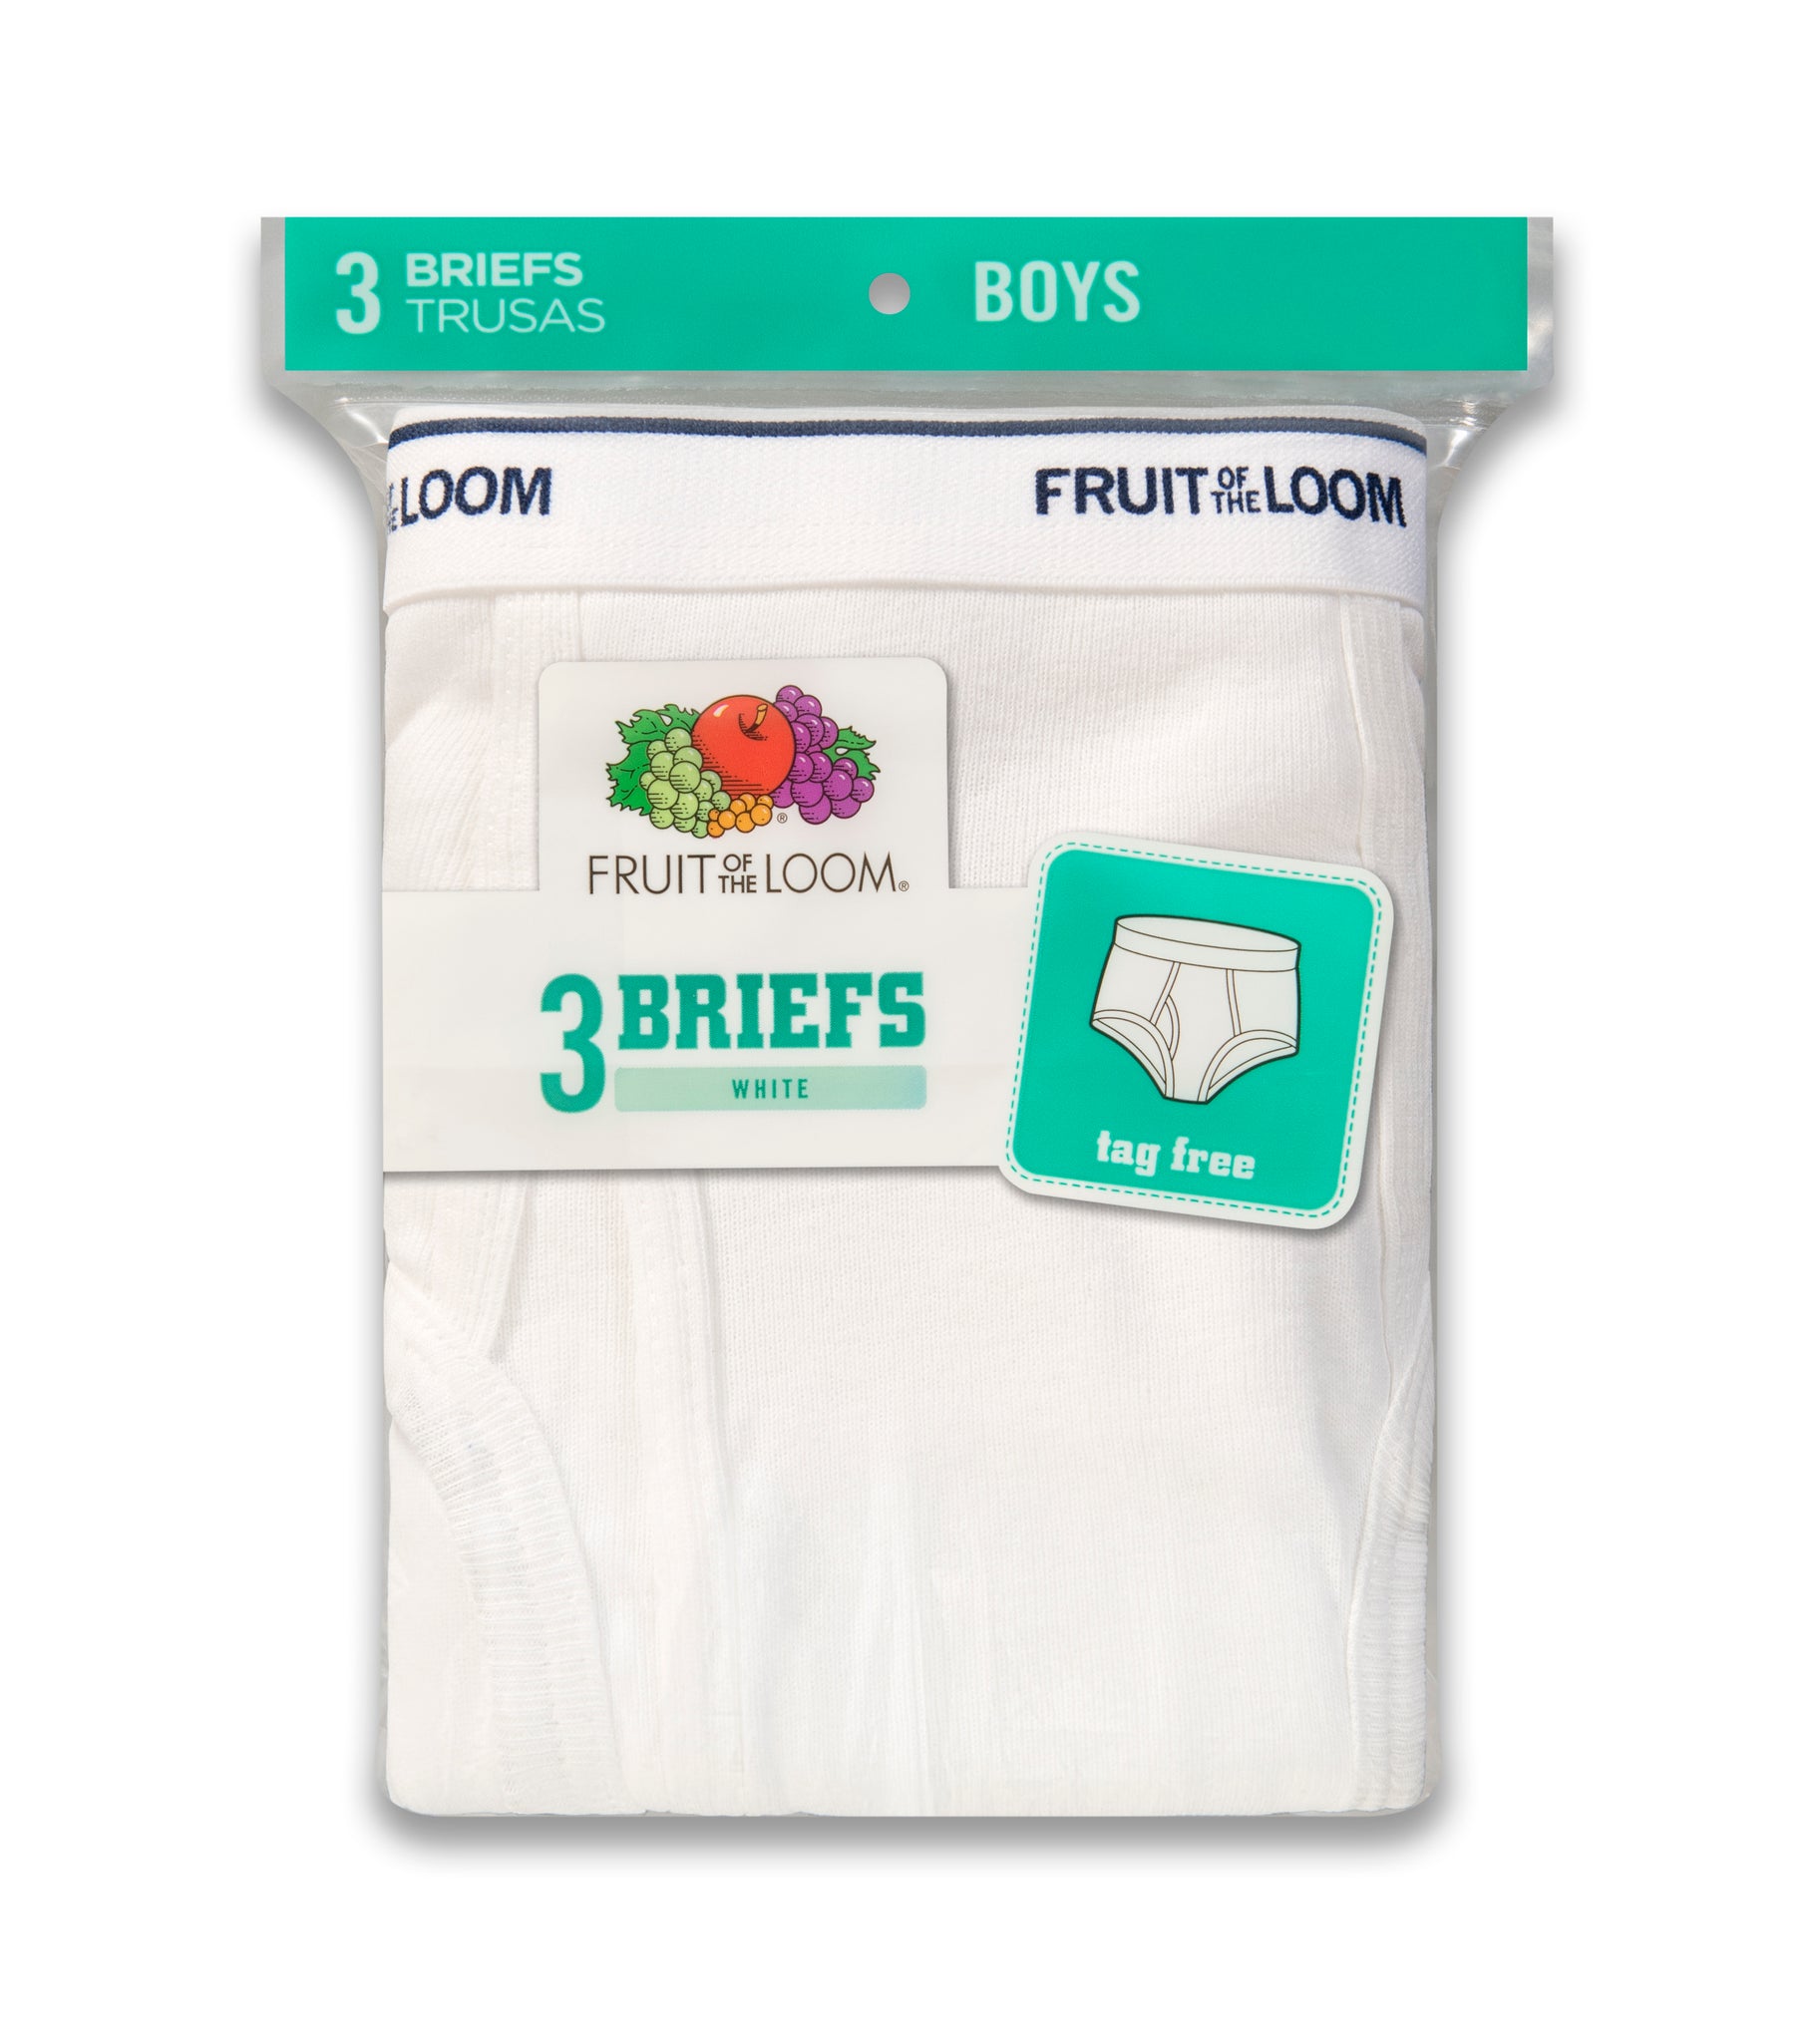 Fruit of the Loom Men's Fashion Briefs, 3-pack – Good's Store Online